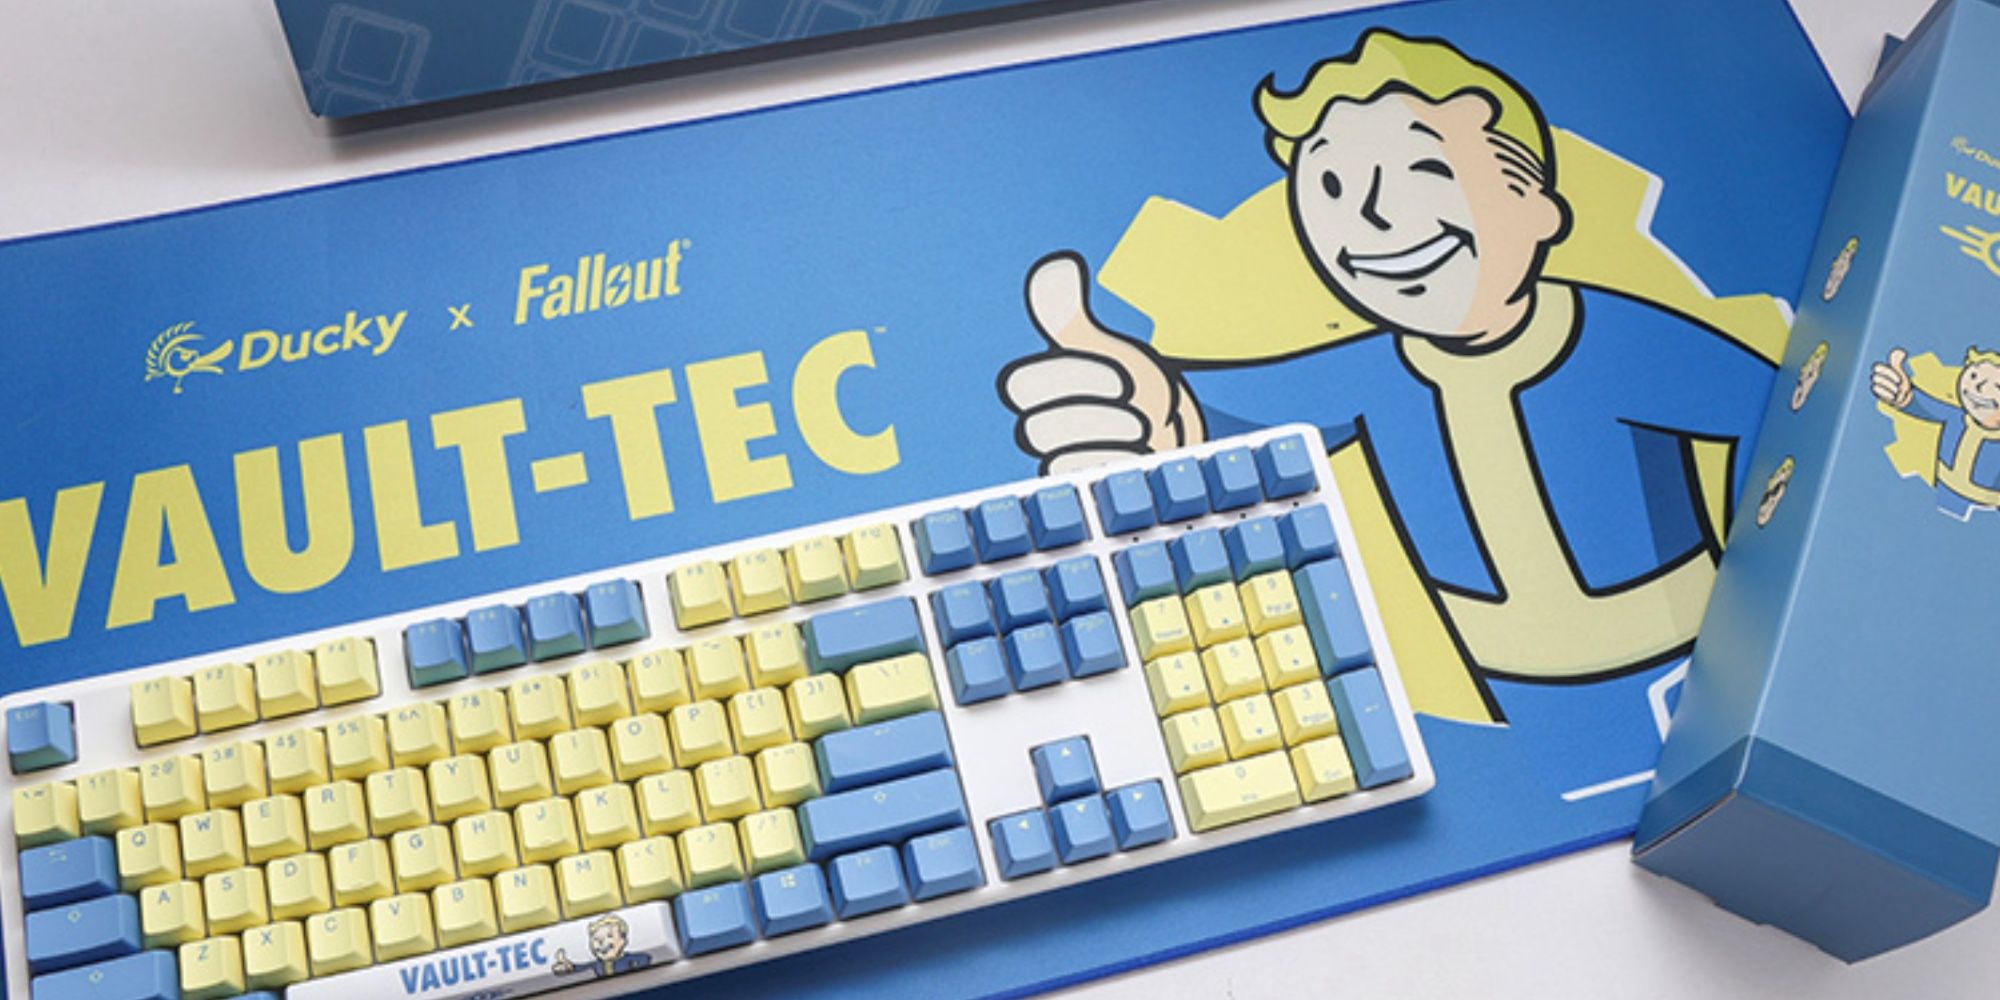 ducky x fallout vault-tec fallout one 3 rgb keyboard